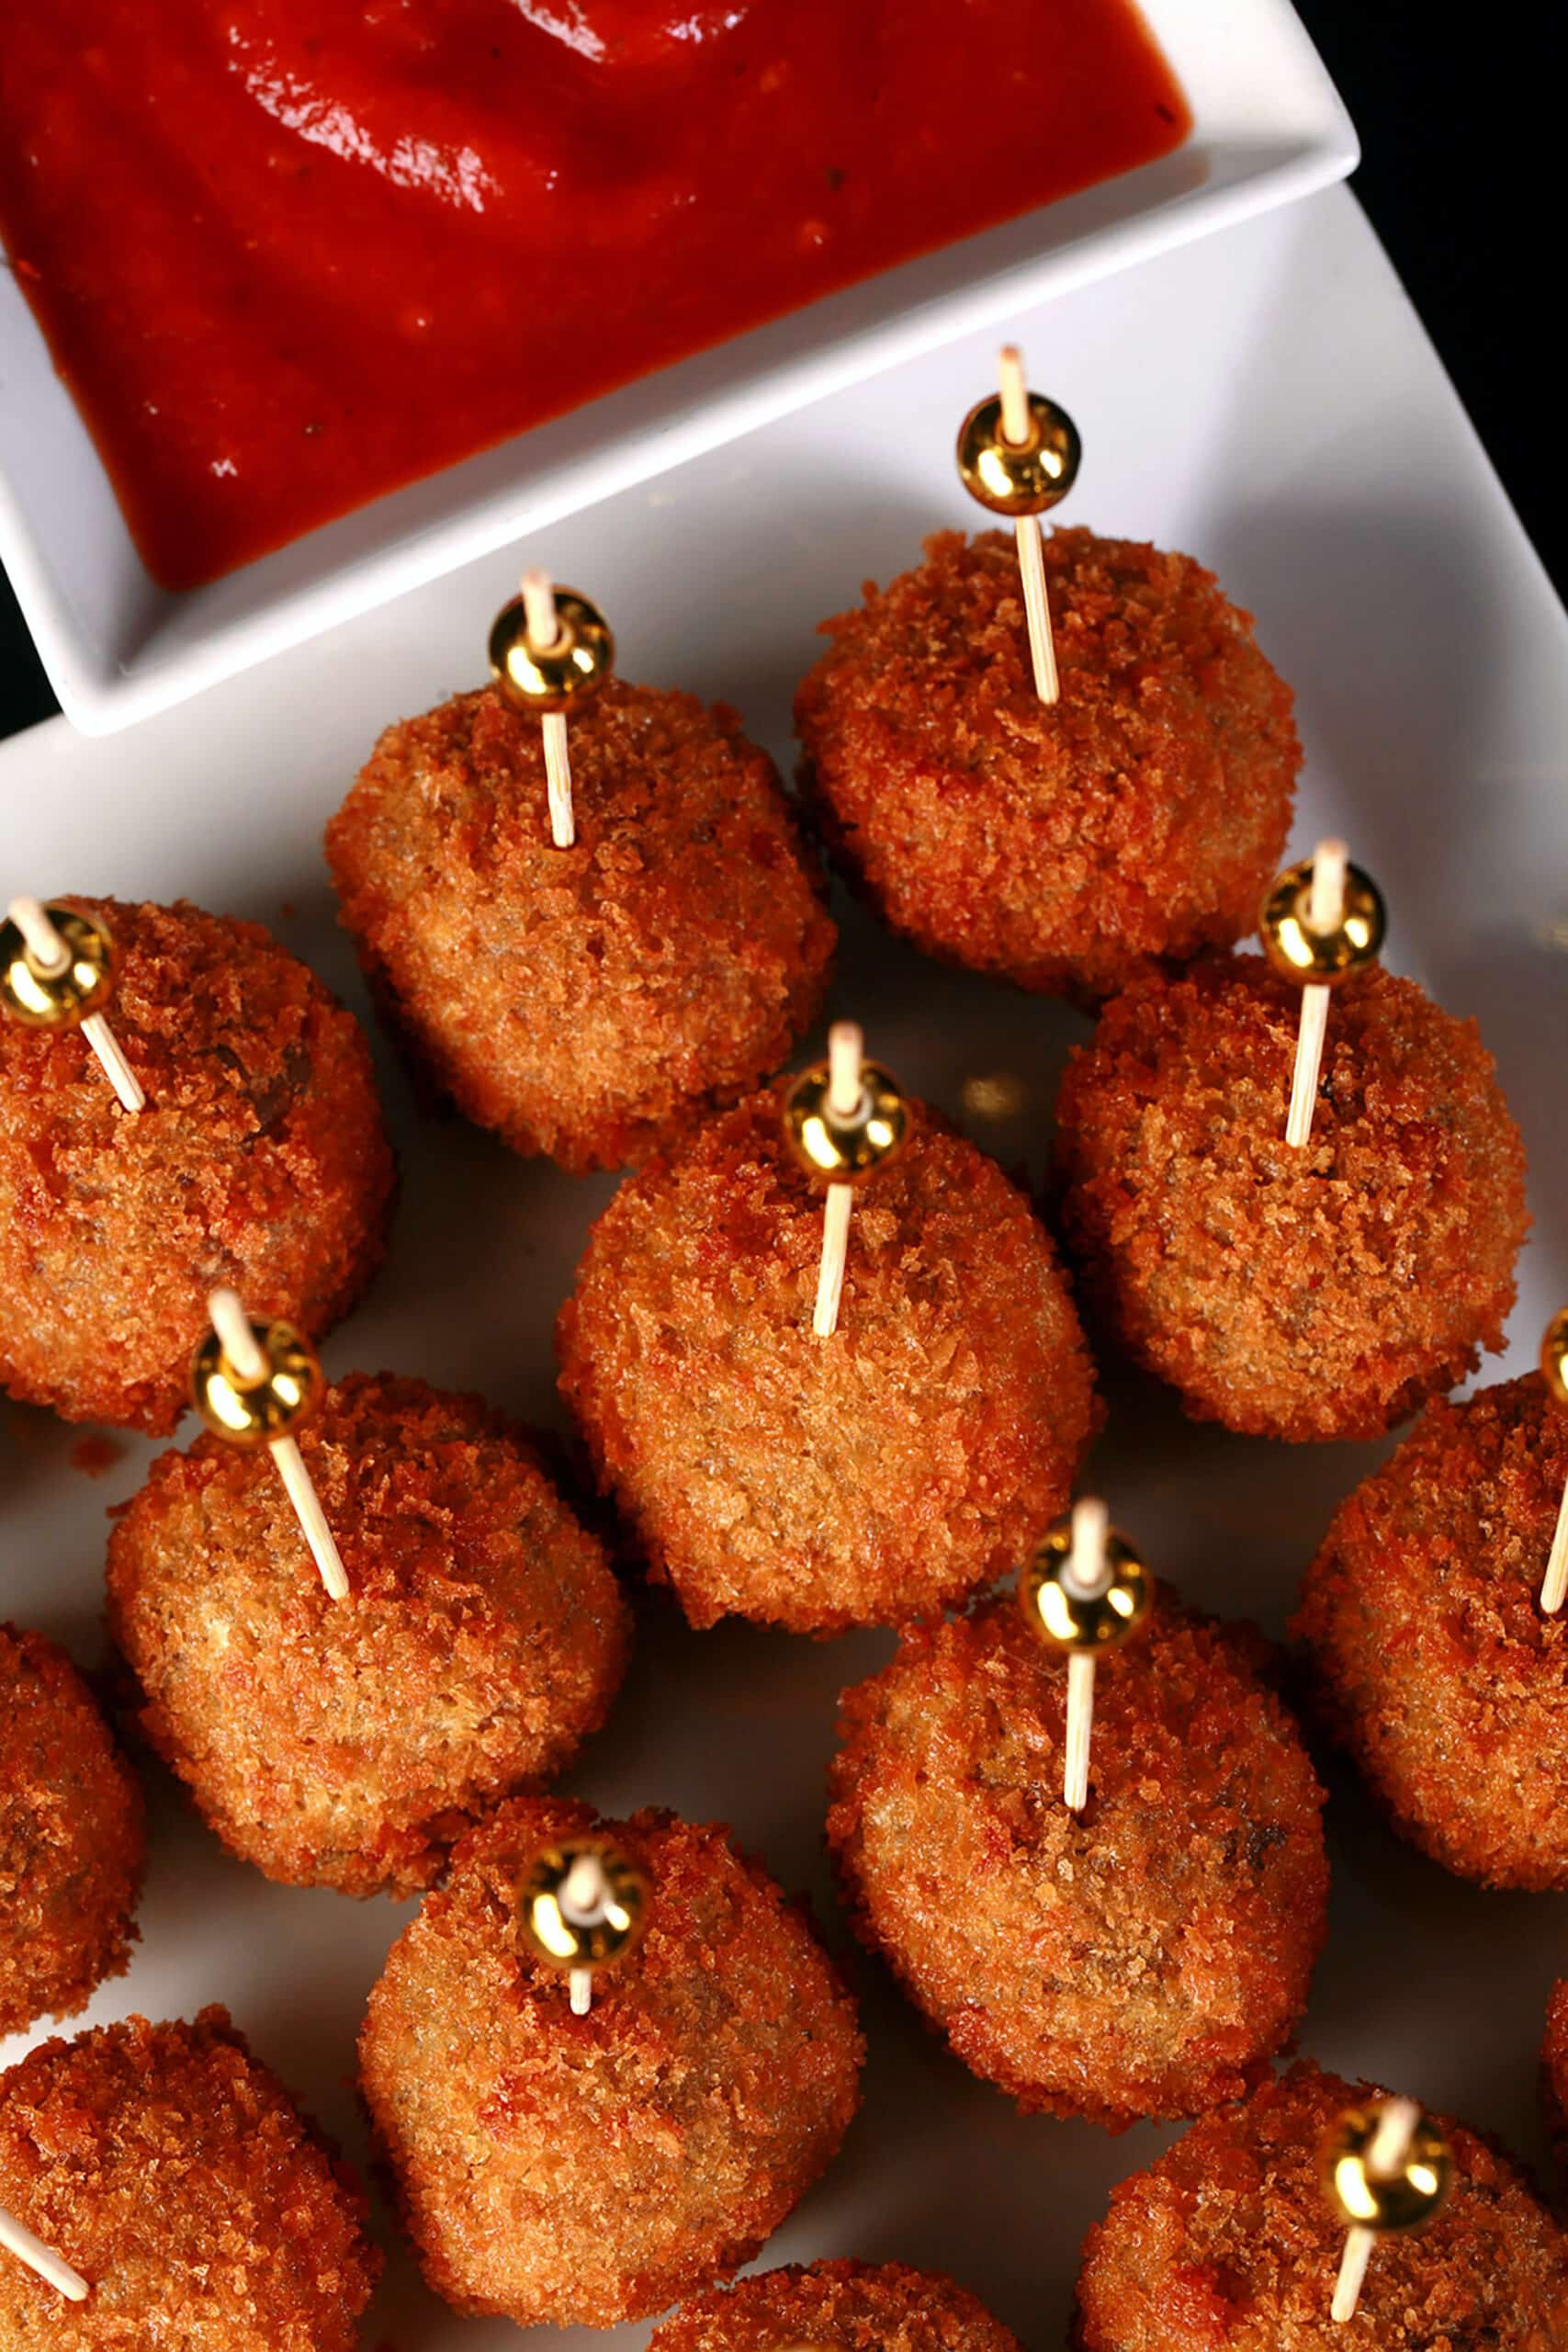 16 mini mushroom arancini on a plate, each with a tall toothpick topped with a gold ball. There is a small bowl of marinara behind the plate.